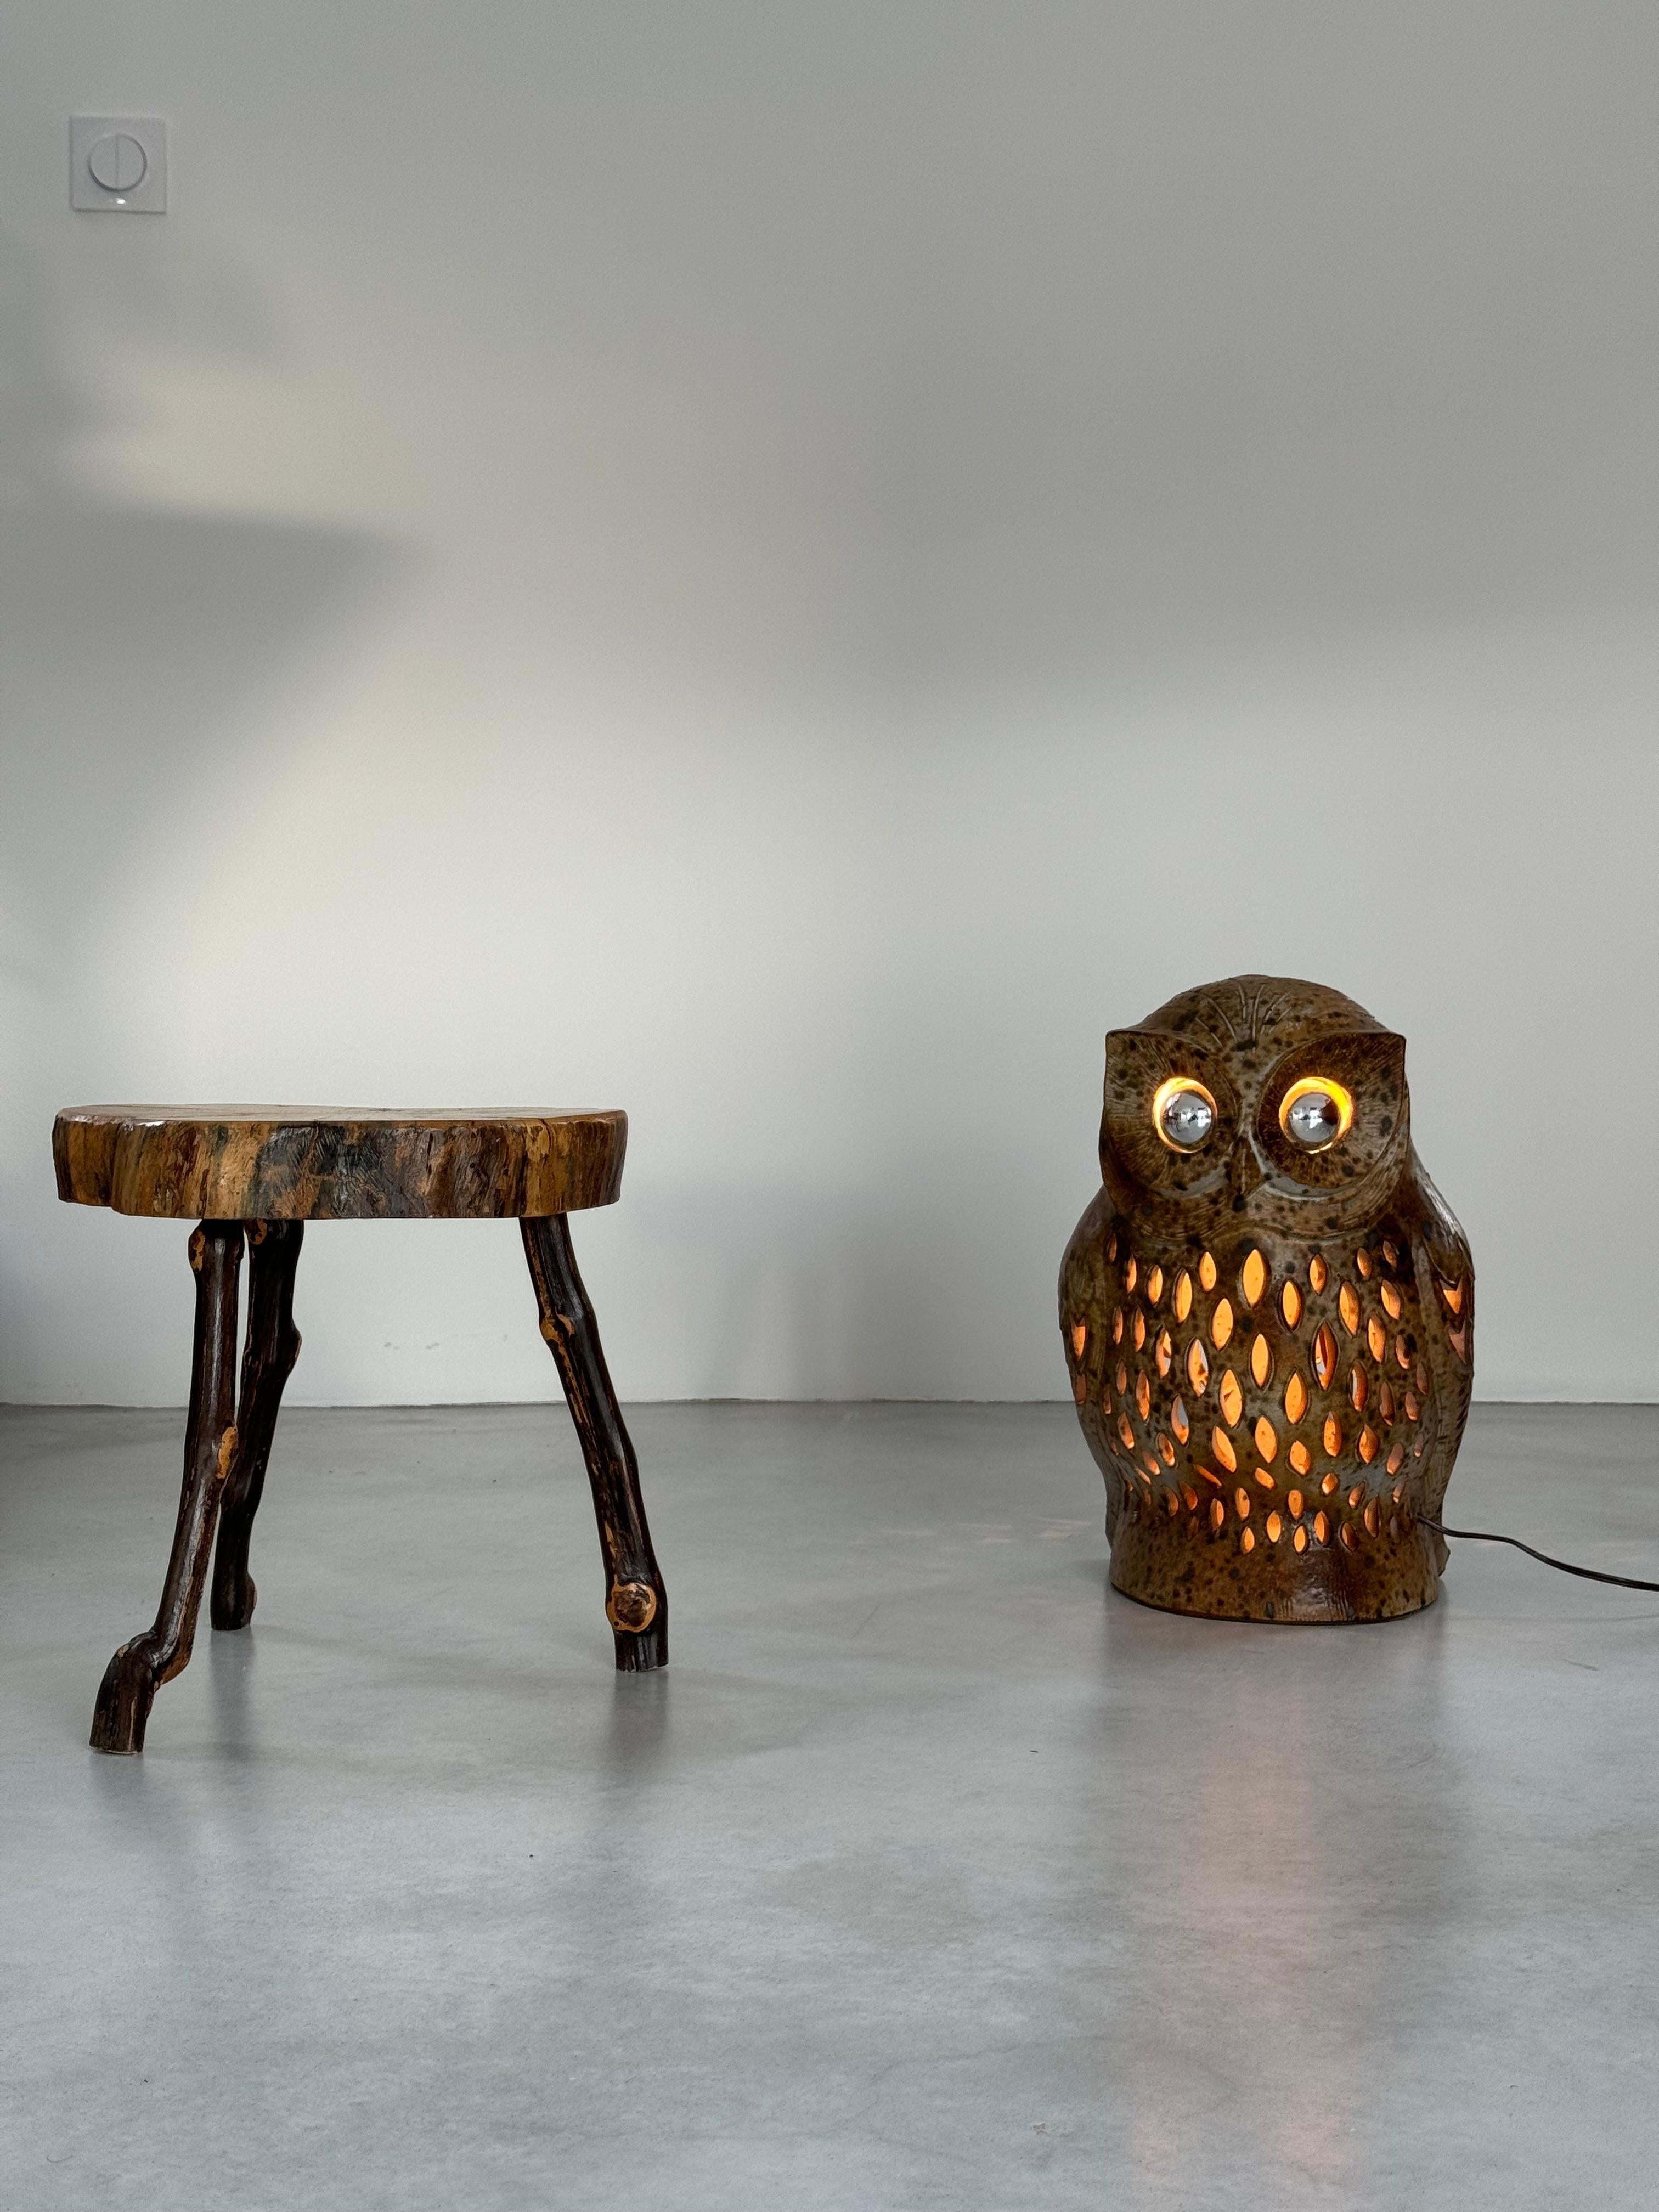 Huge sculpted ceramic owl lamp.

Unique work created by the renowned French ceramist Agnes Escala.
Lamp with subdued lighting, caused by 2 bulbs with chrome caps and its openwork body.
Enamelled ceramic, monochrome shades ranging from a coppery